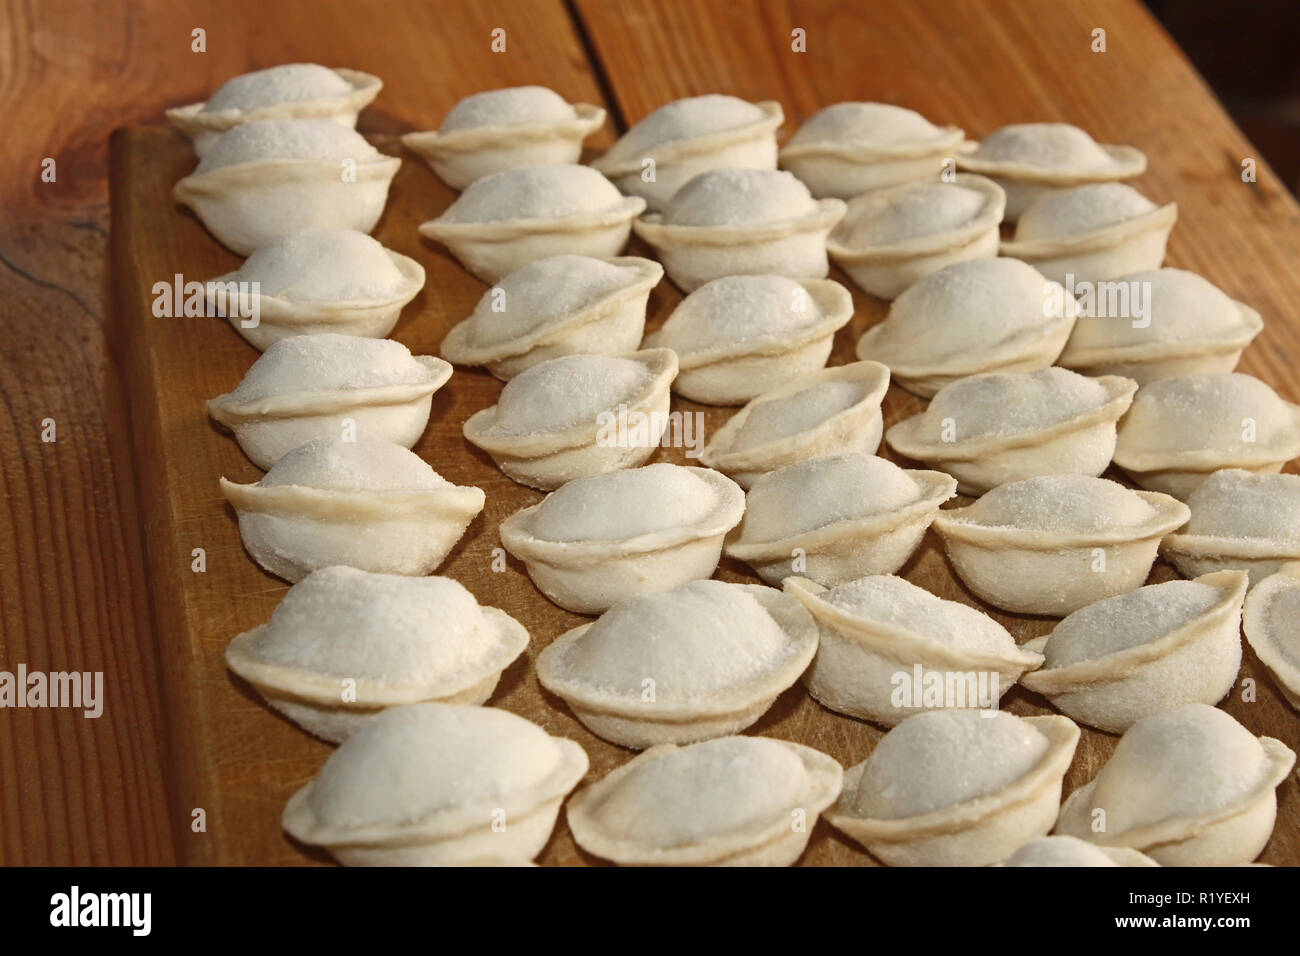 Frozen dumplings with meat on the kitchen board. Dumplings or ravioli is a traditional East Slavic kitchen dish also known as pelmeni Stock Photo